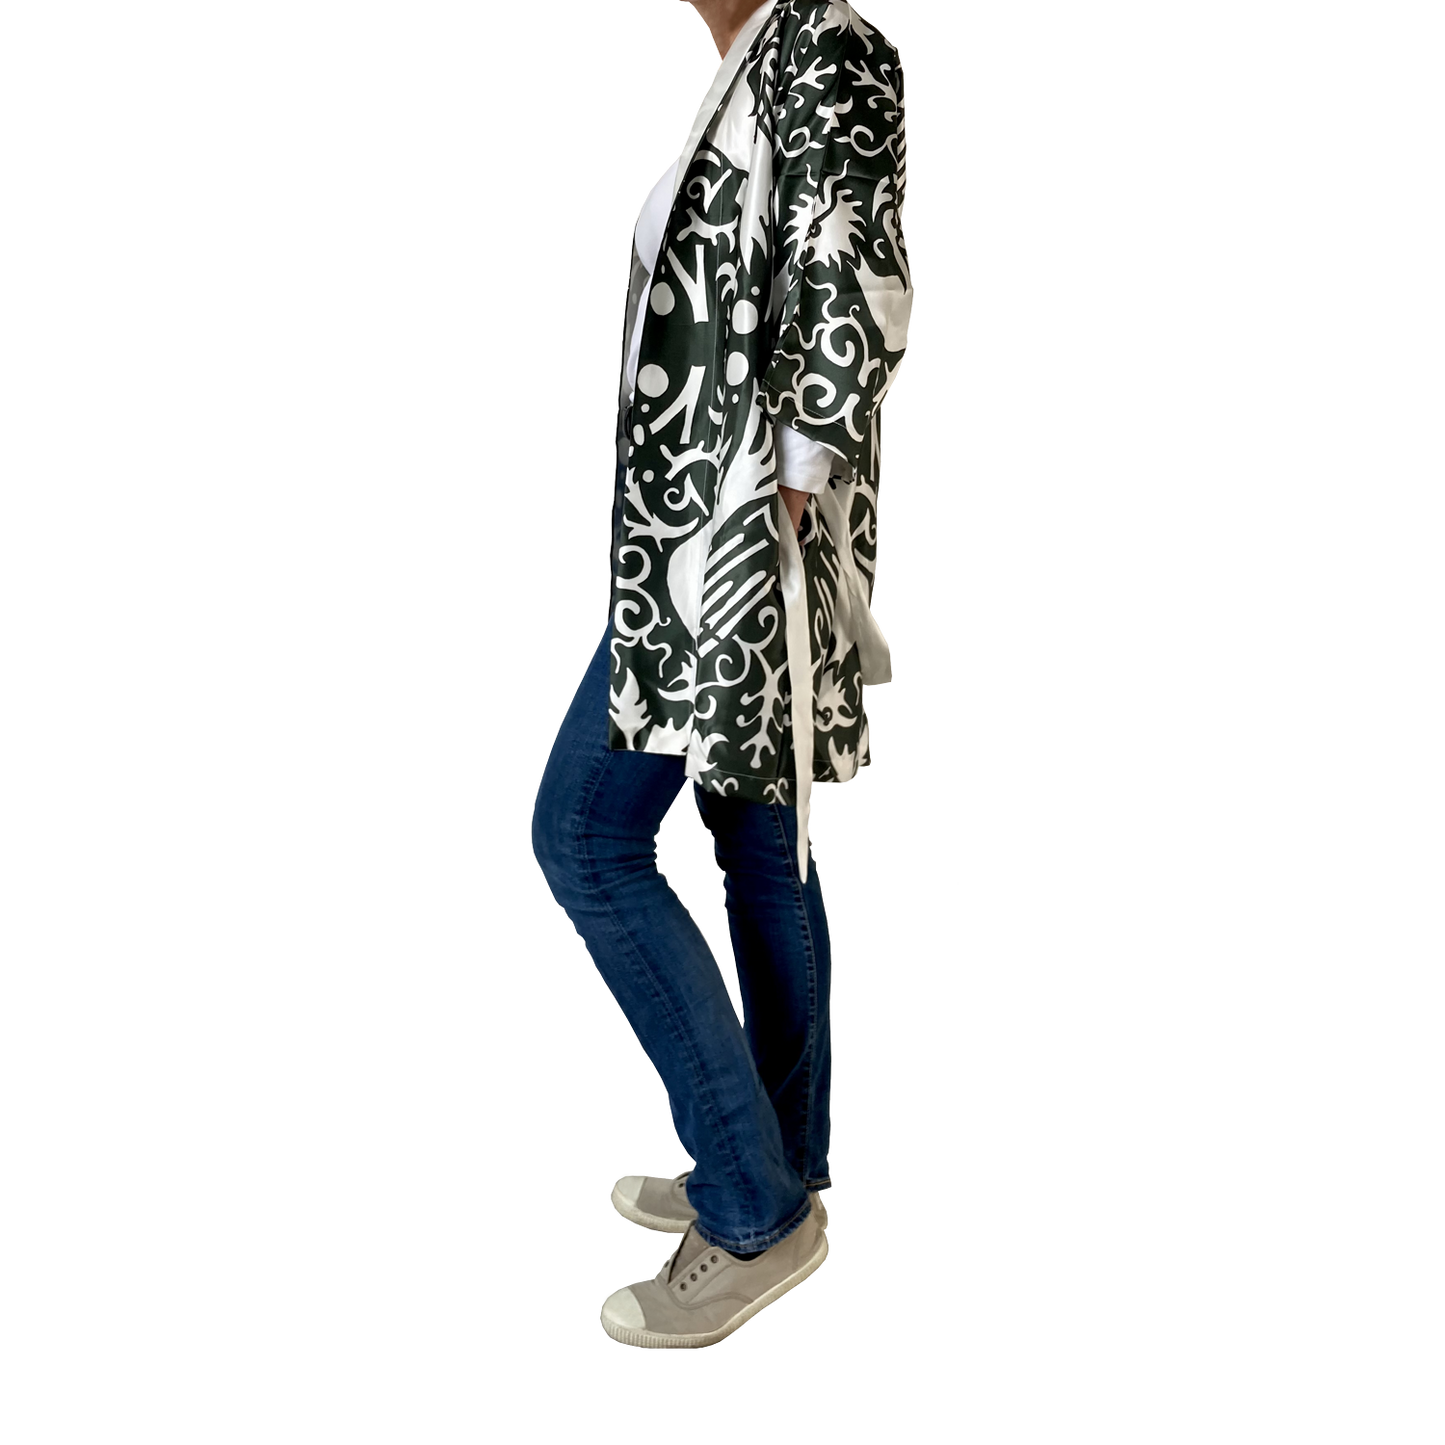 A green and white silk kimono with a phoenix pattern is shown on a model with jeans